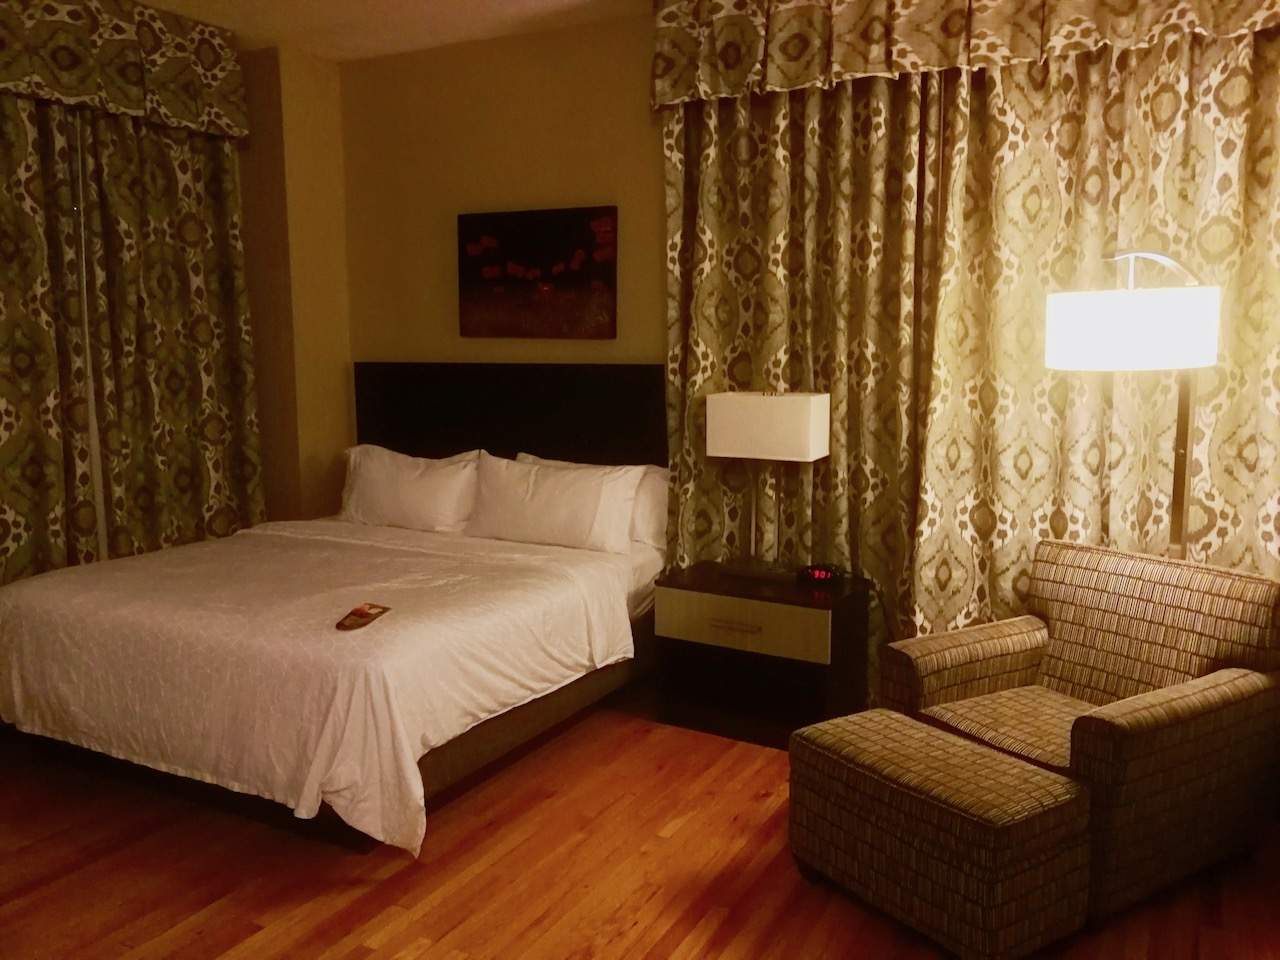 Holiday Inn Express Cleveland Room